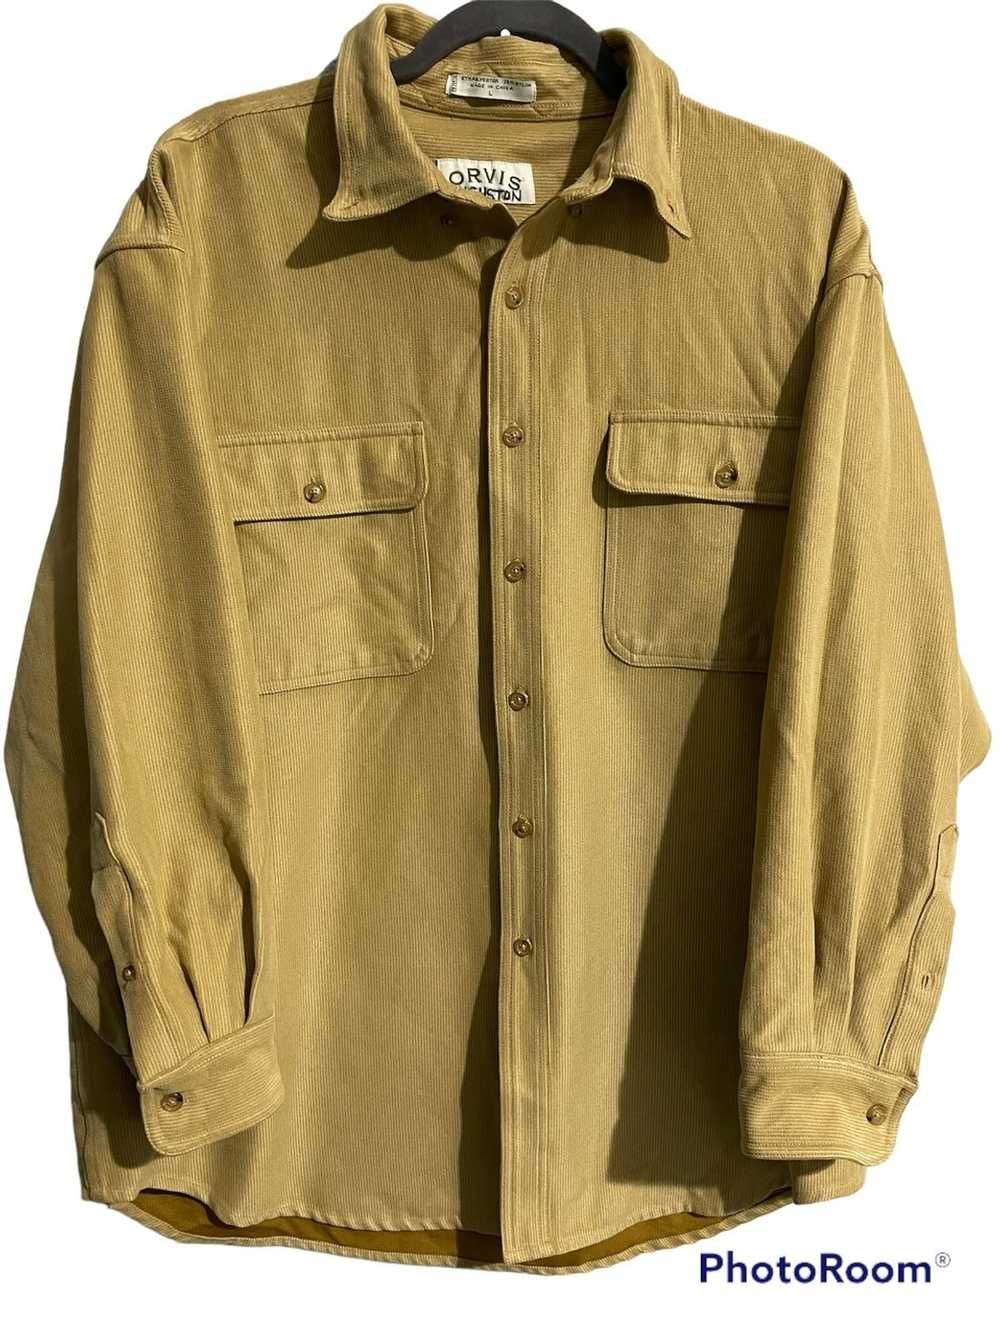 Orvis Orvis Shirt Button Sporting Tradition Sz L - image 2